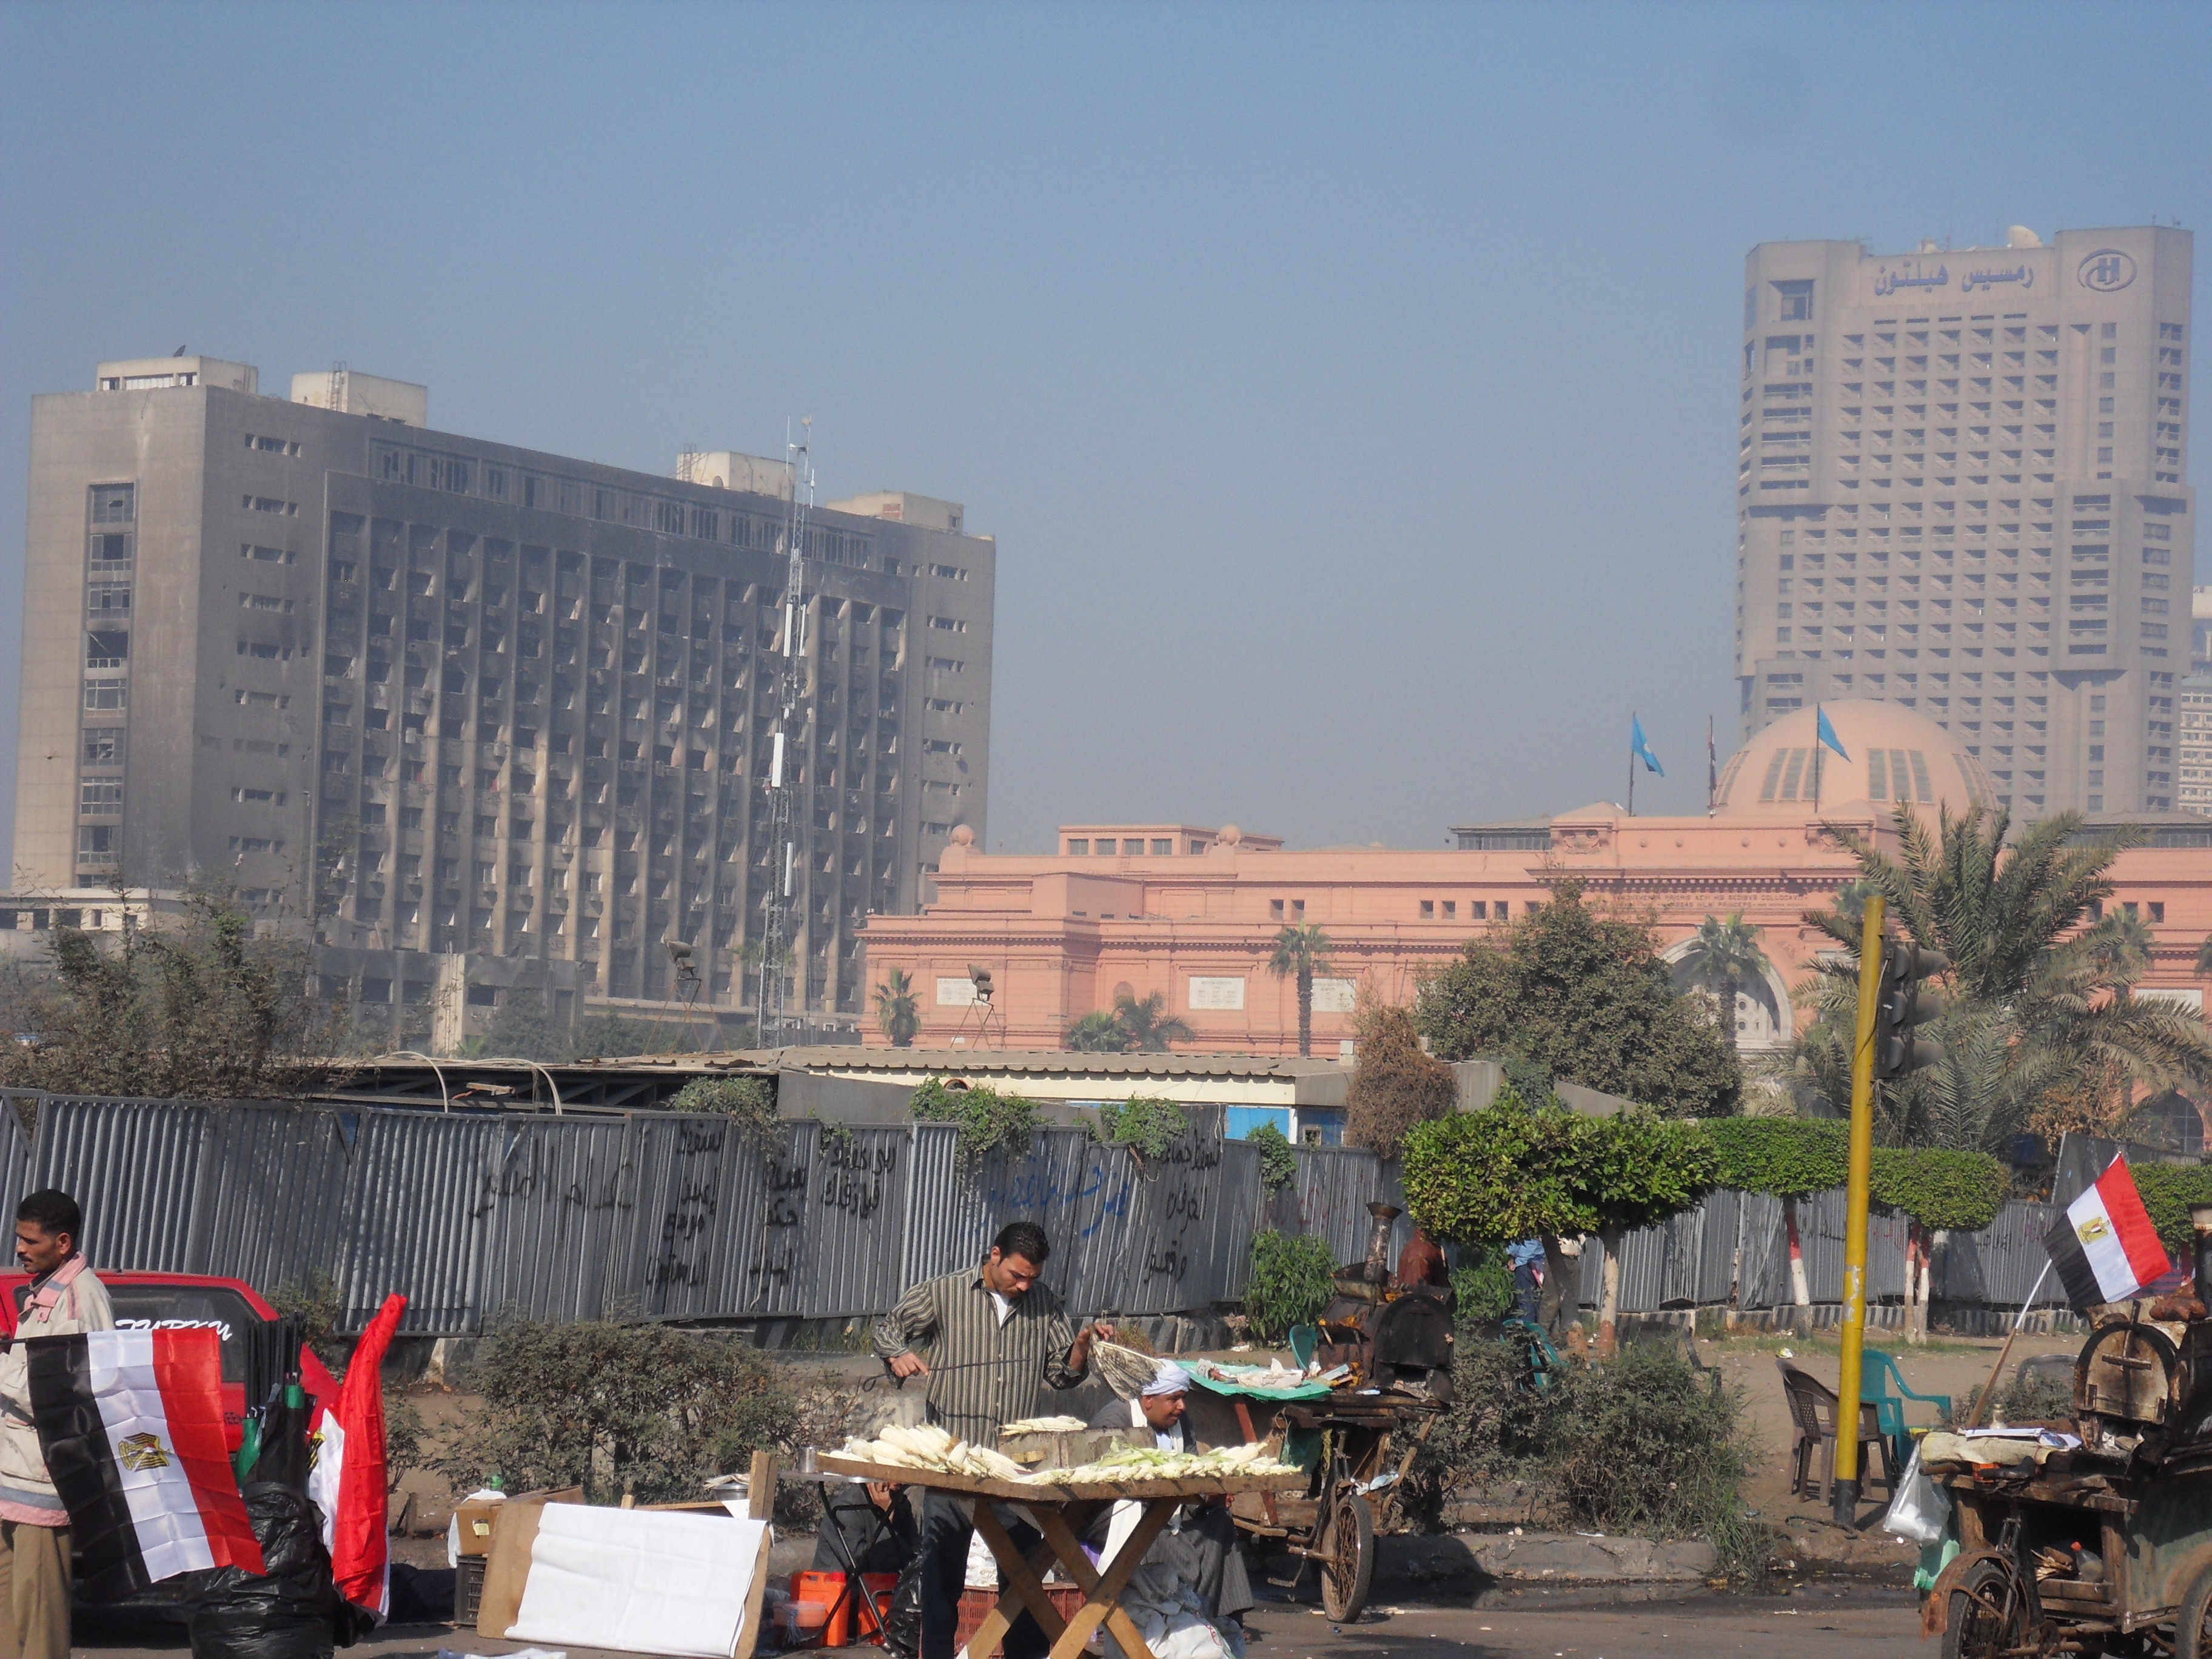 The National Democratic Party's burnt down HQ remains as a stinging reminder of Egypt's 2011 revolution